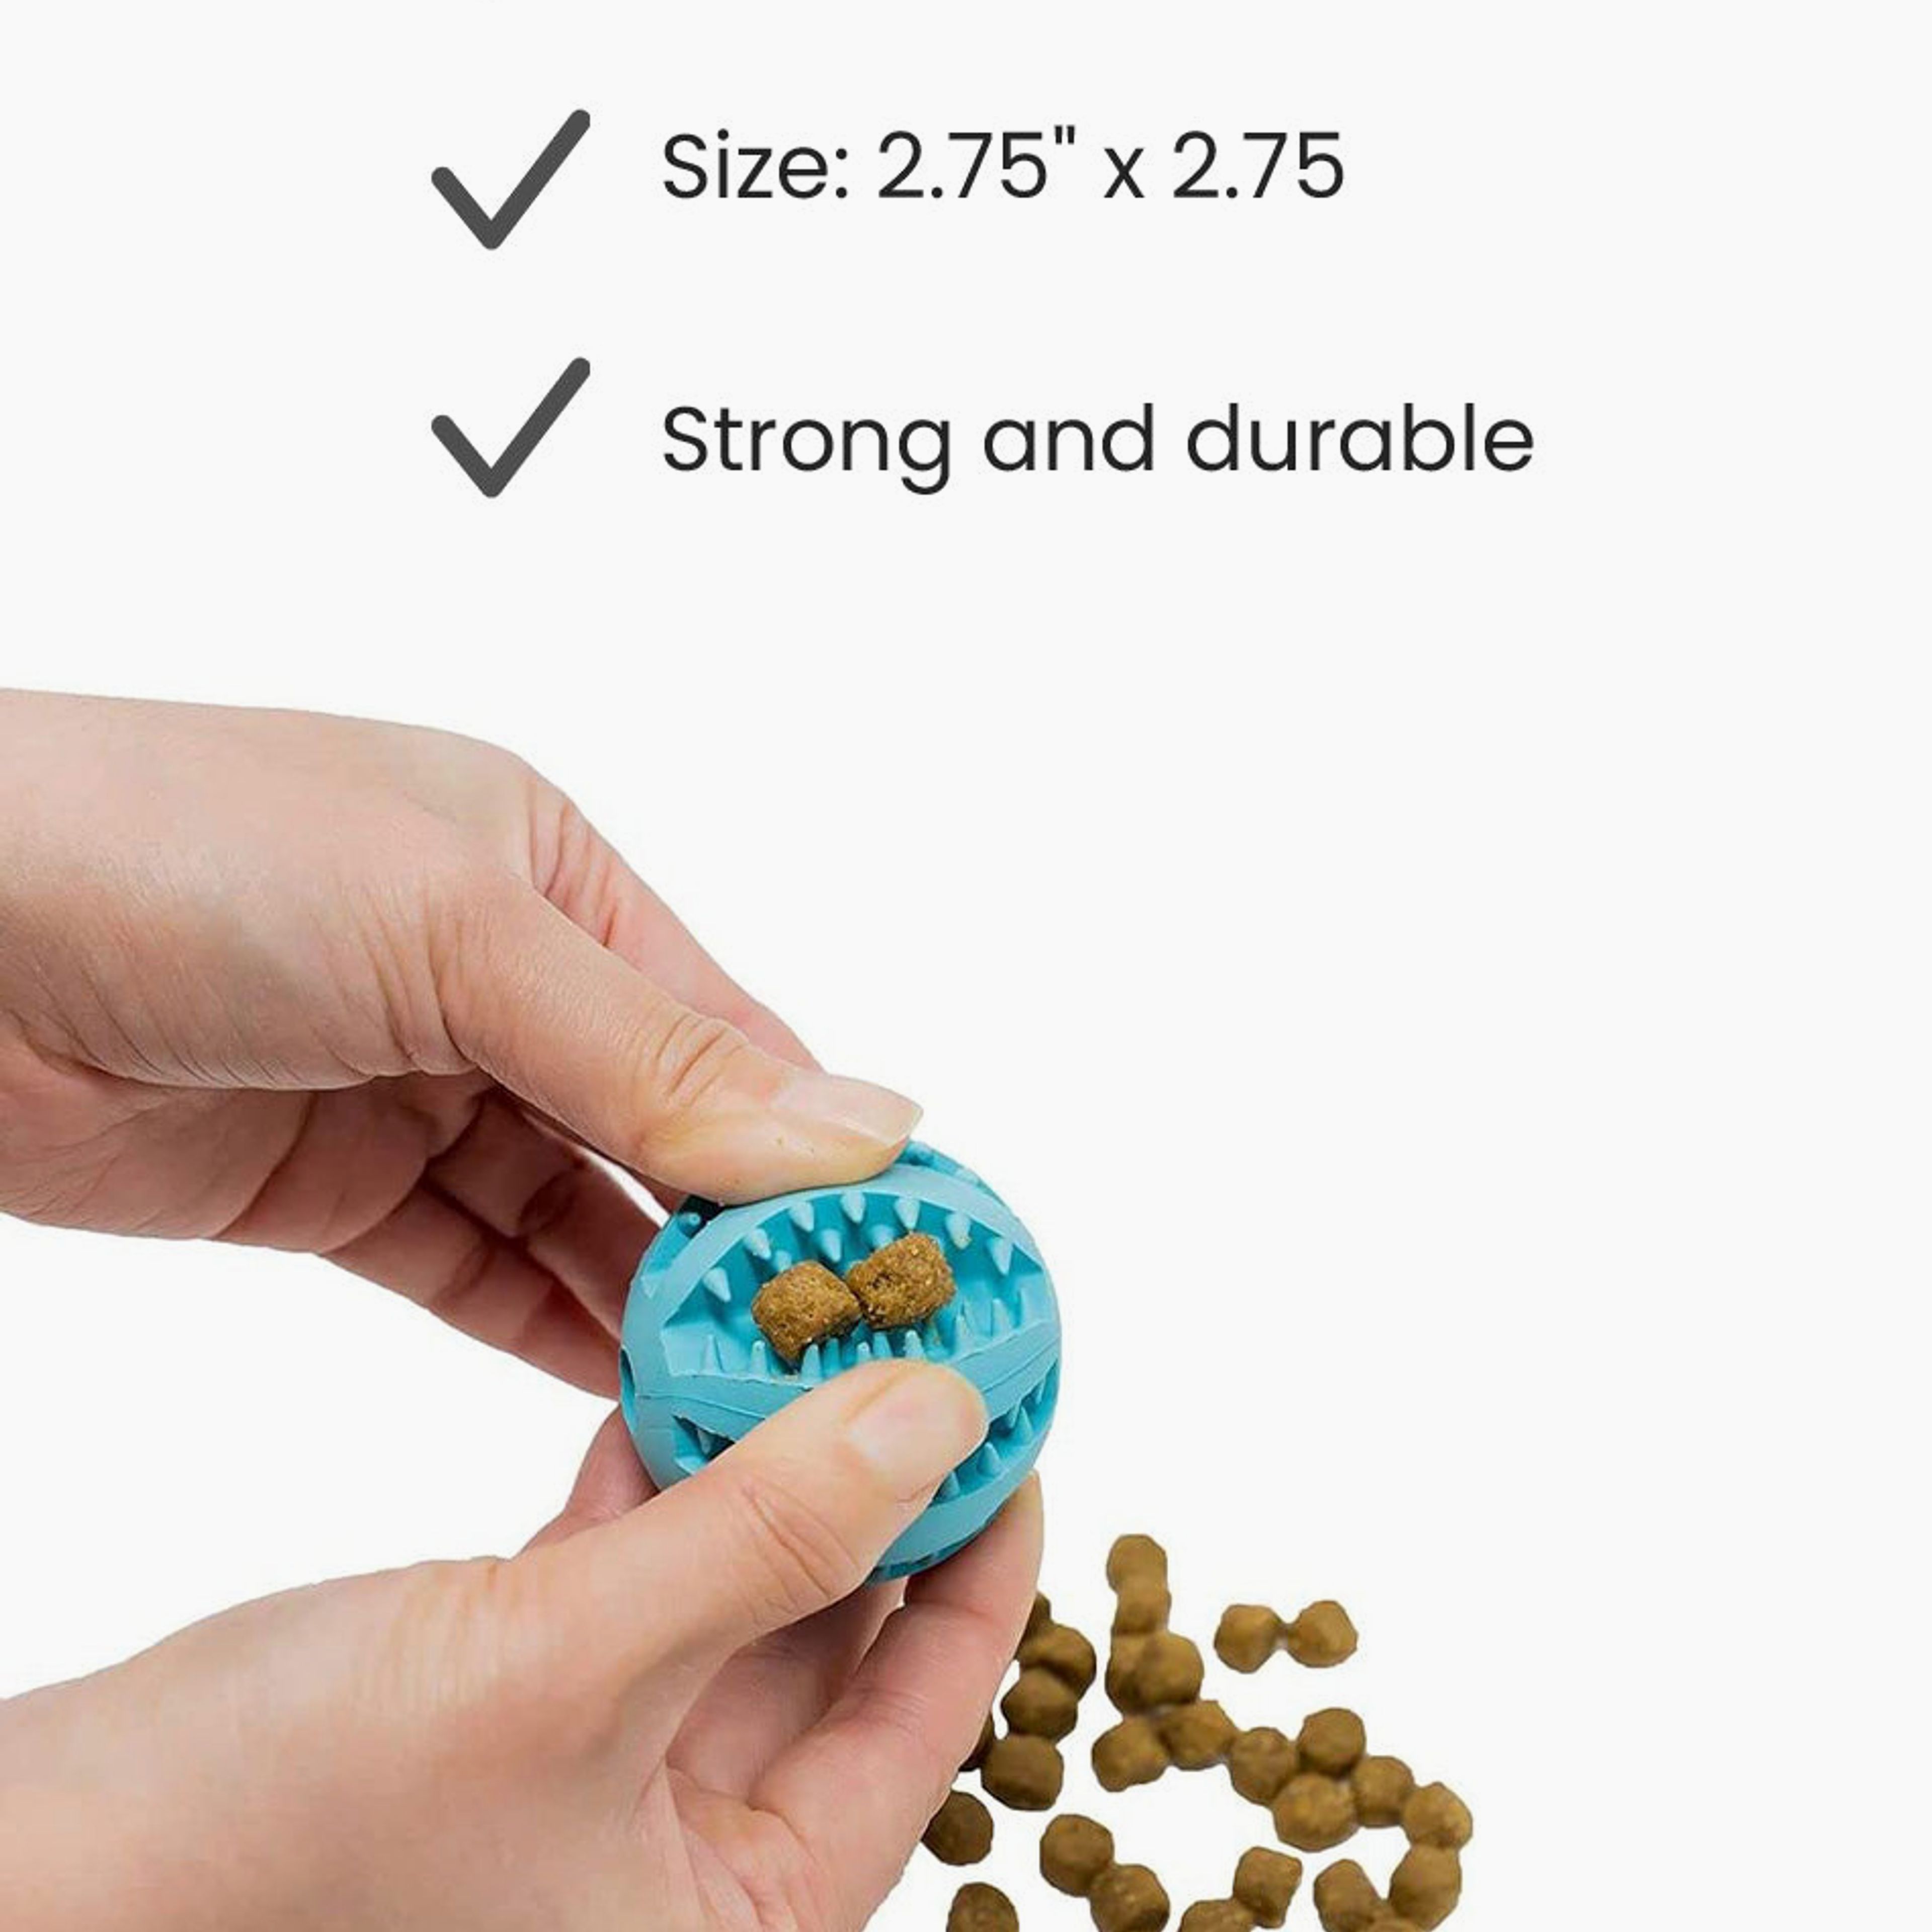 Stuffable Ball for Chewing and Teeth DogsToy